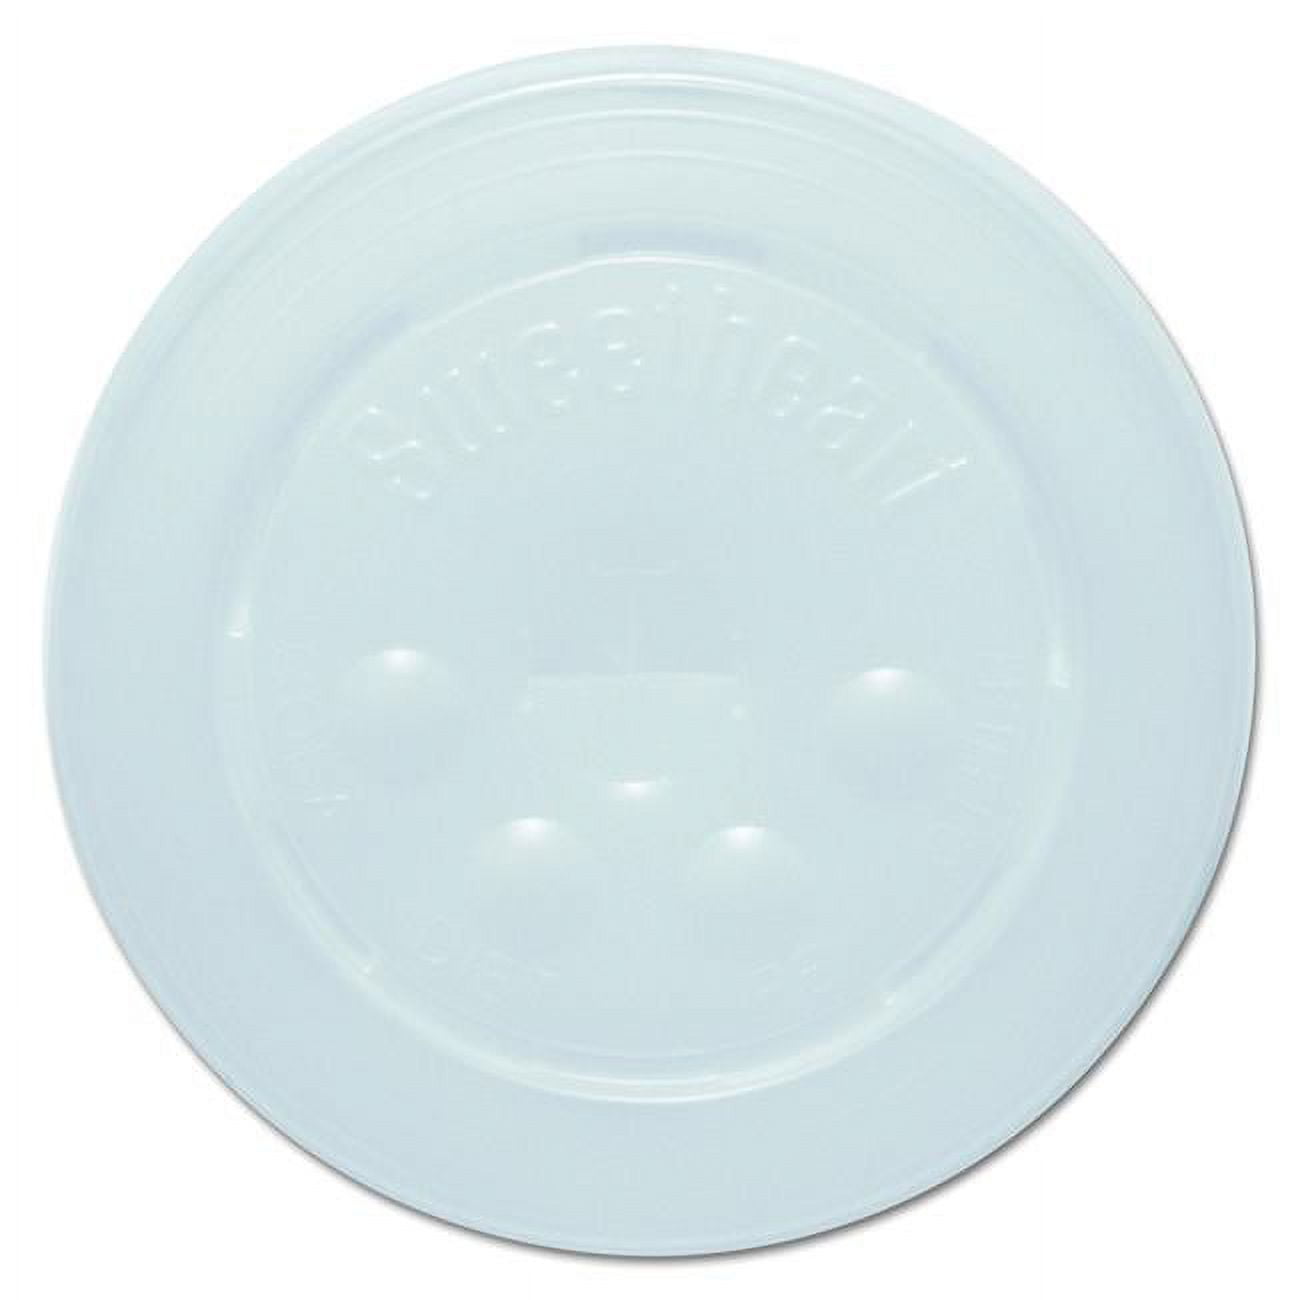 Solo Cup L16bl-0100 16-21 Oz Translucent Polystyrene Identification Straw Slot Lid For Paper Cold Cup - Case Of 2000